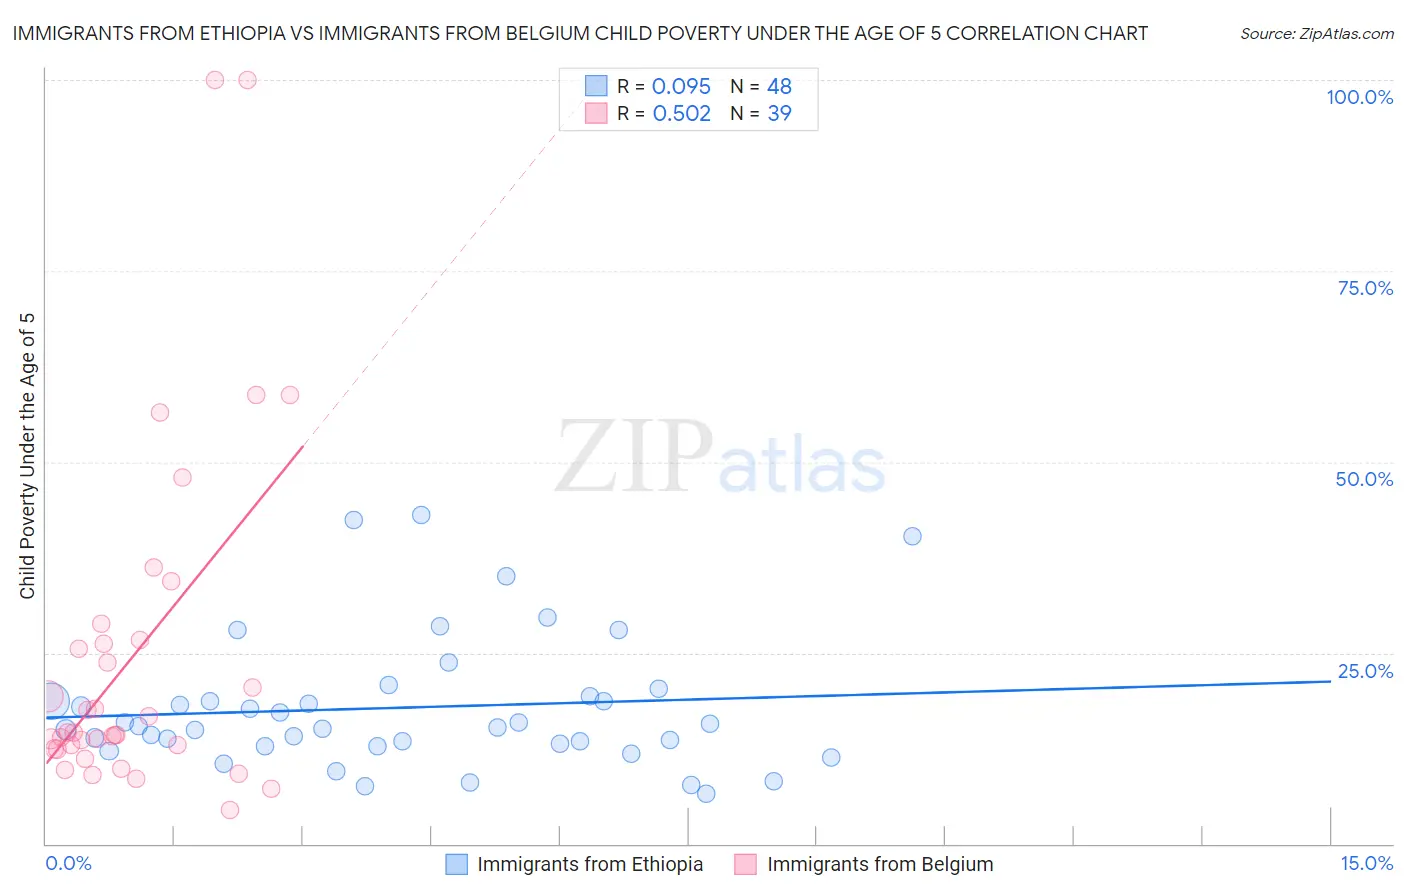 Immigrants from Ethiopia vs Immigrants from Belgium Child Poverty Under the Age of 5